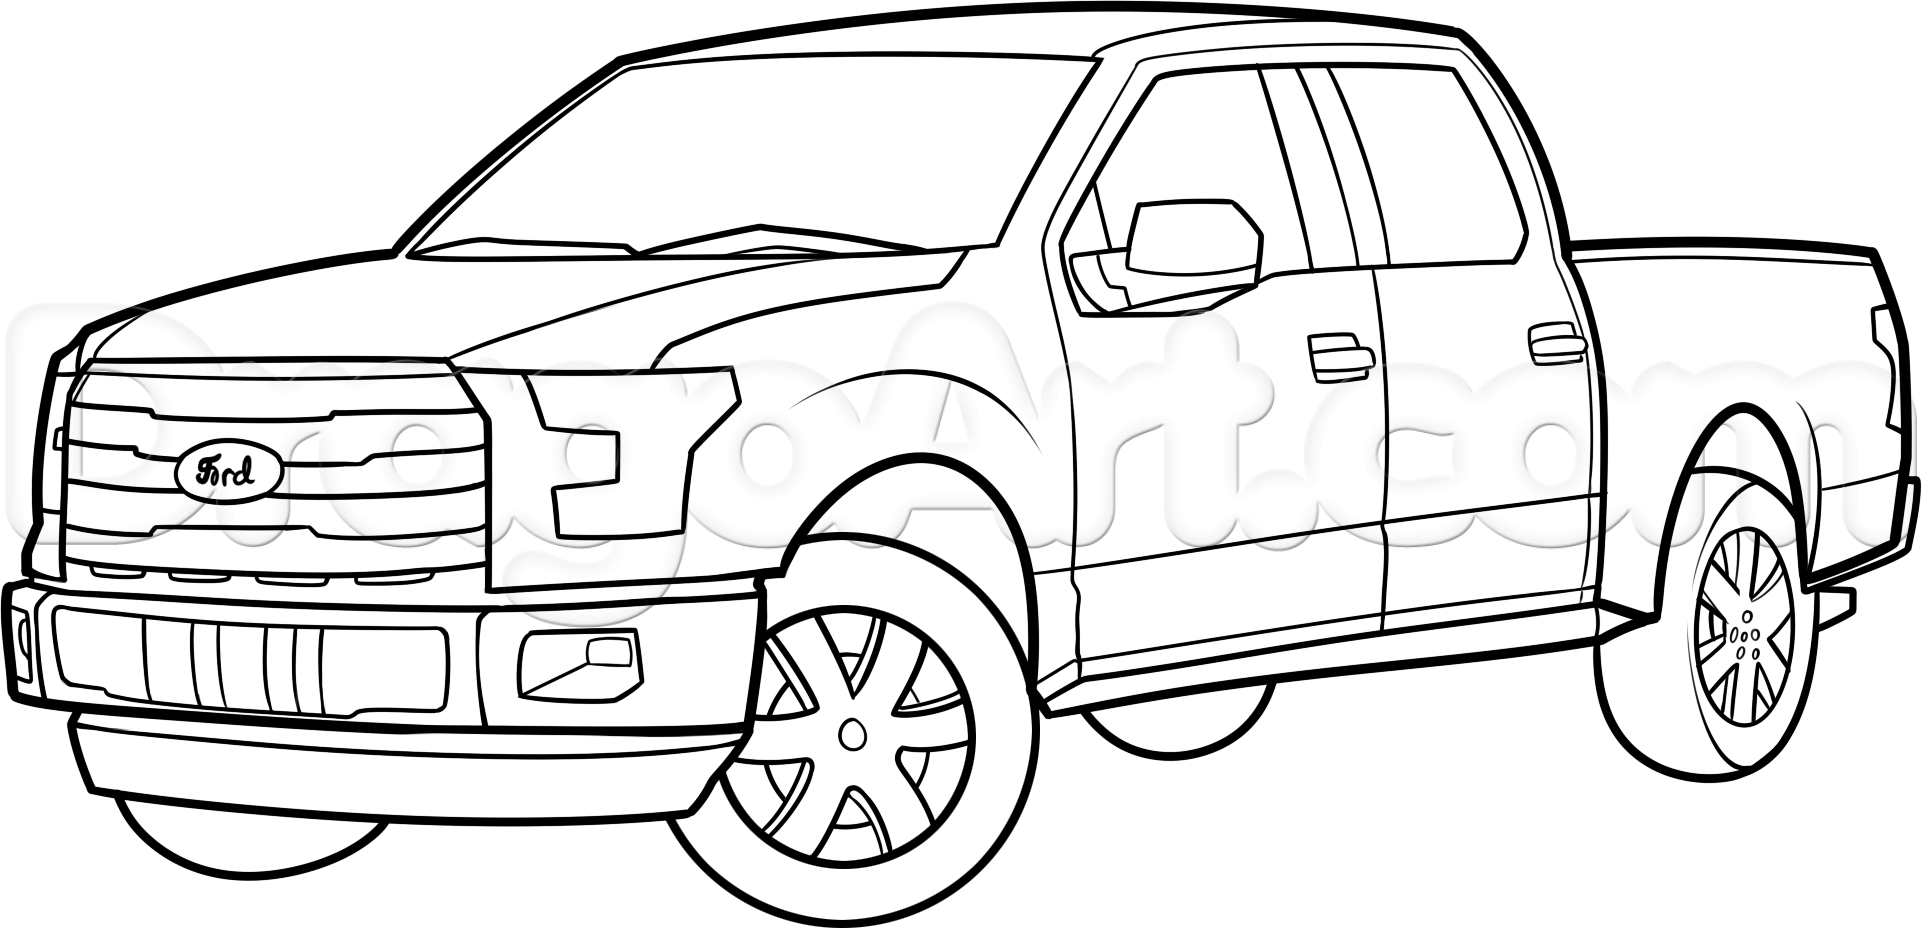 How To Draw An F-150 Ford Pickup Truck by Dawn | Car drawings ...